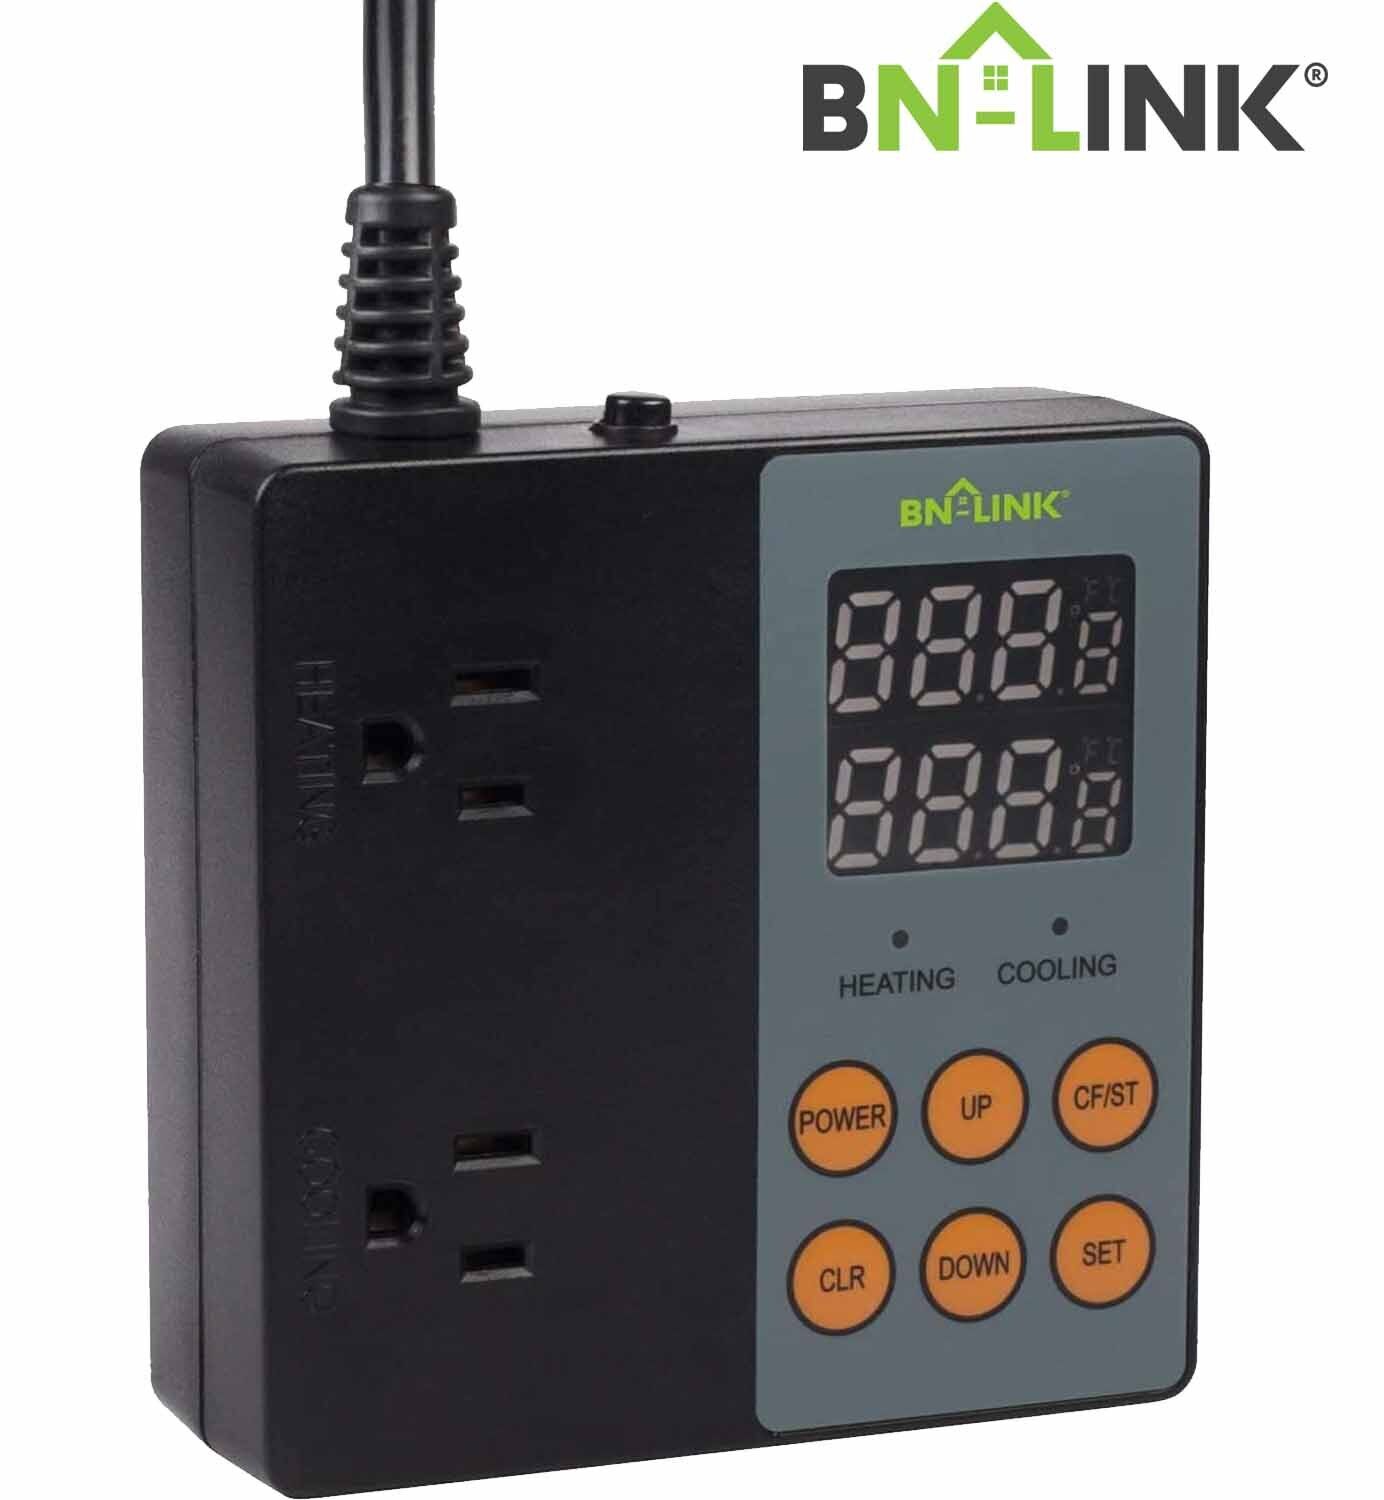 BN-LINK Digital Professional Thermostat Controller Heating or Cooling 2-Output